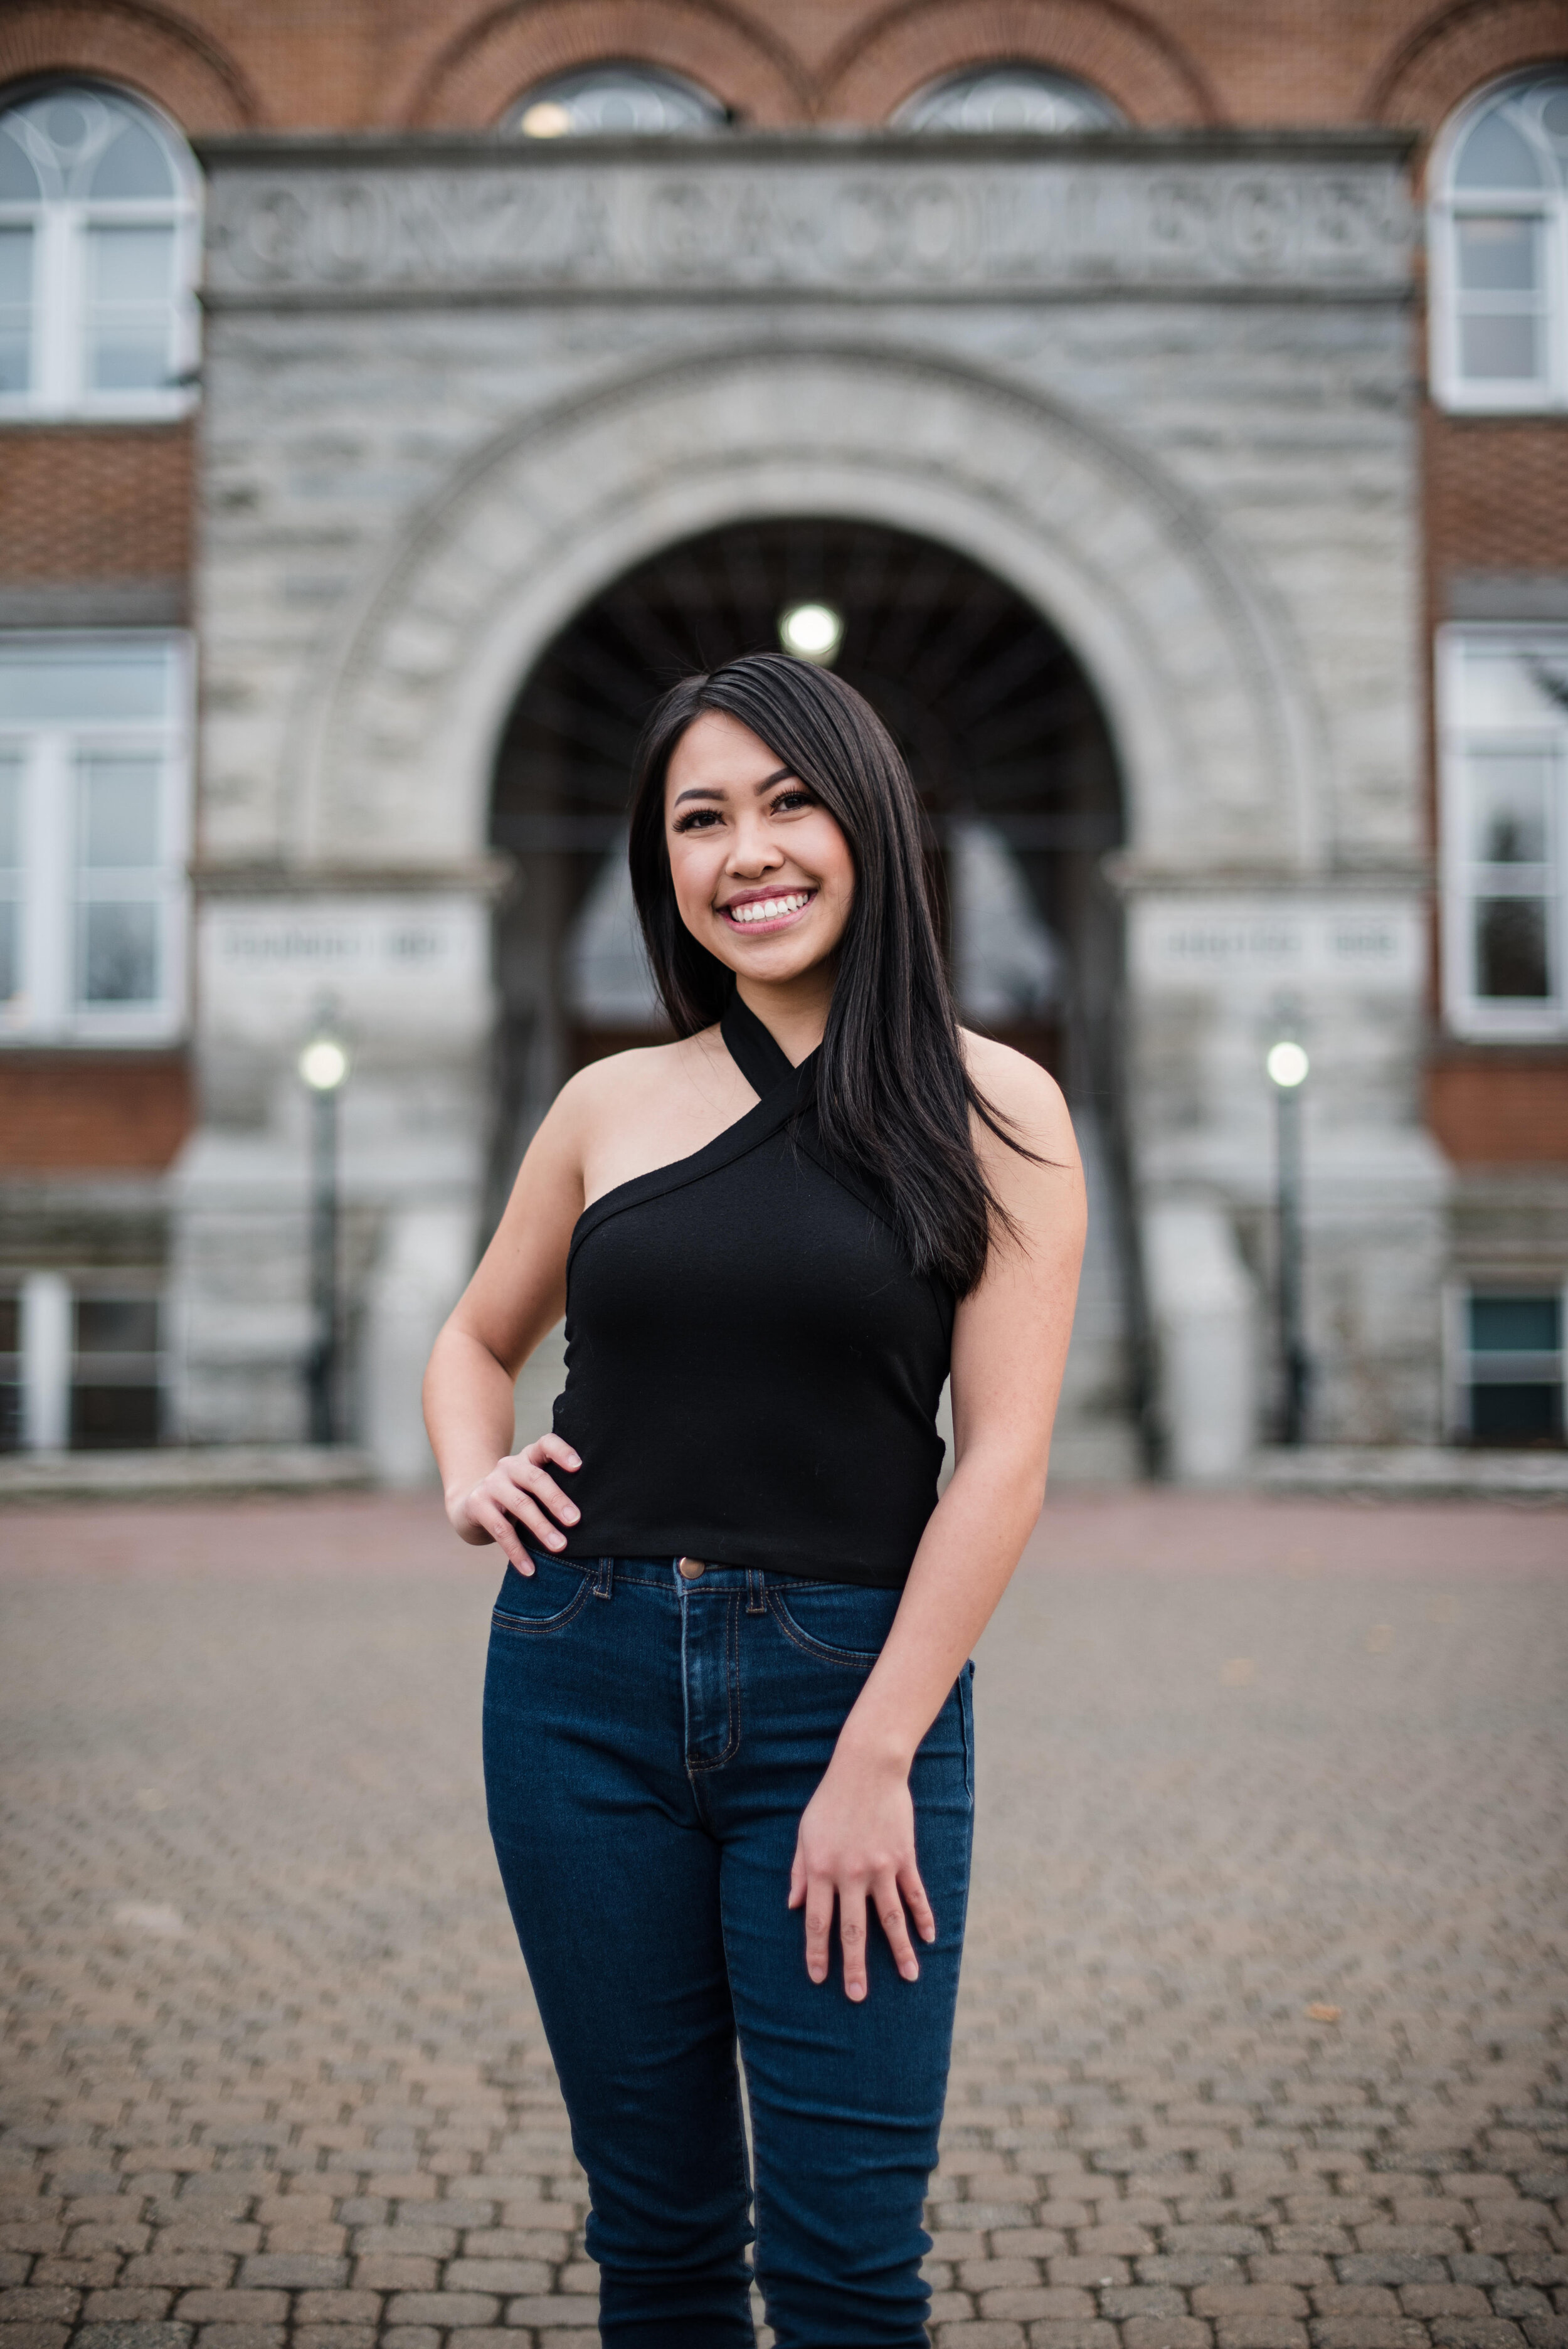 “Hello! My name is Tia Moua and I am a 19 year old Hmong-American from Washington State. I am very passionate about Asian-American activism and social justice work. I am currently planning on majoring in Communication Studies and International Relations. I enjoy dancing, playing 